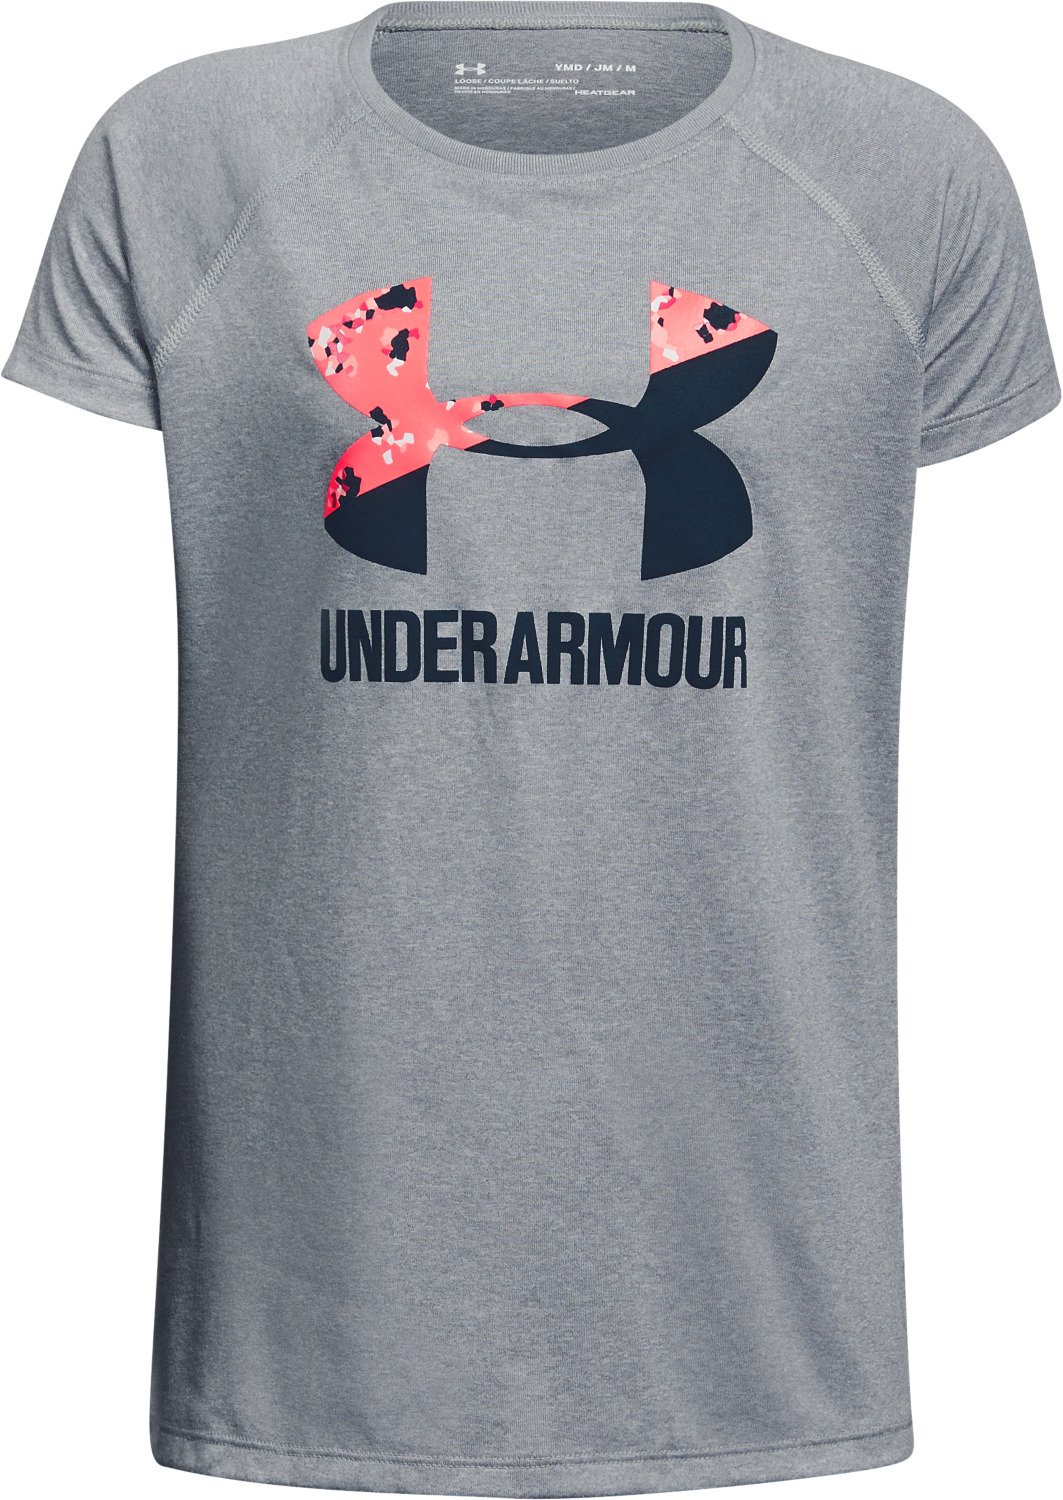 under armour shirts for girls